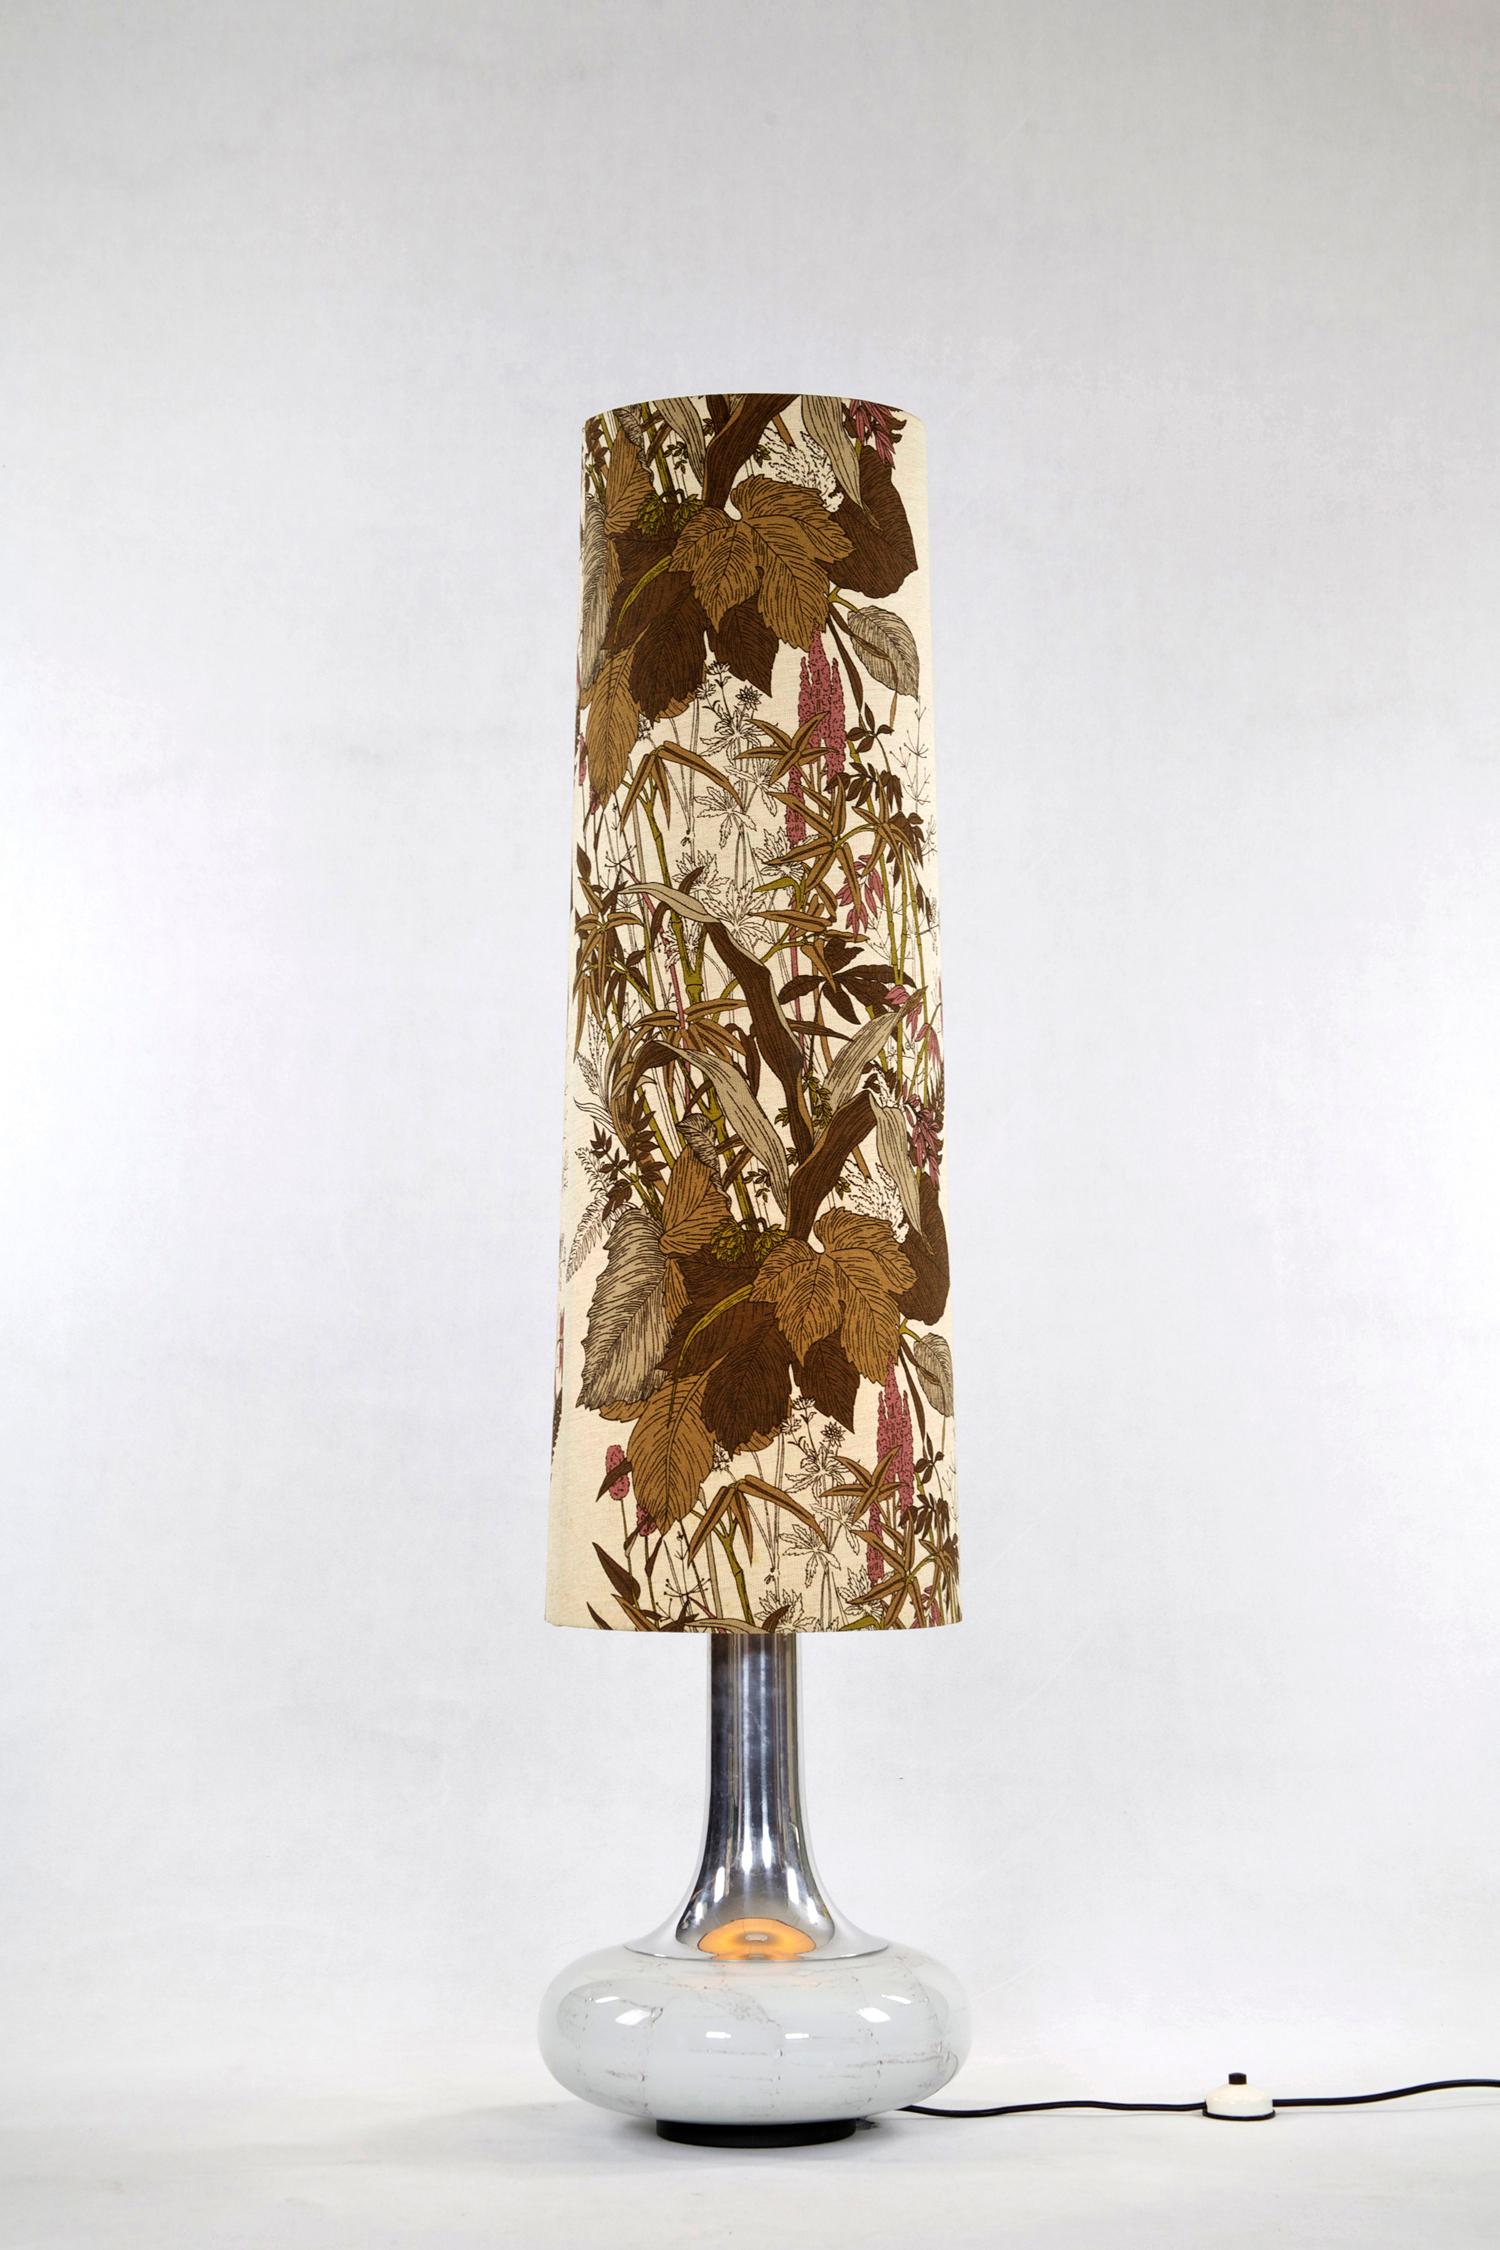 This floor Lamp was designed in the 1970s. It consists of an illuminated glass base and fabric shade with floral pattern.

Feel free to contact us for more detailed pictures.

